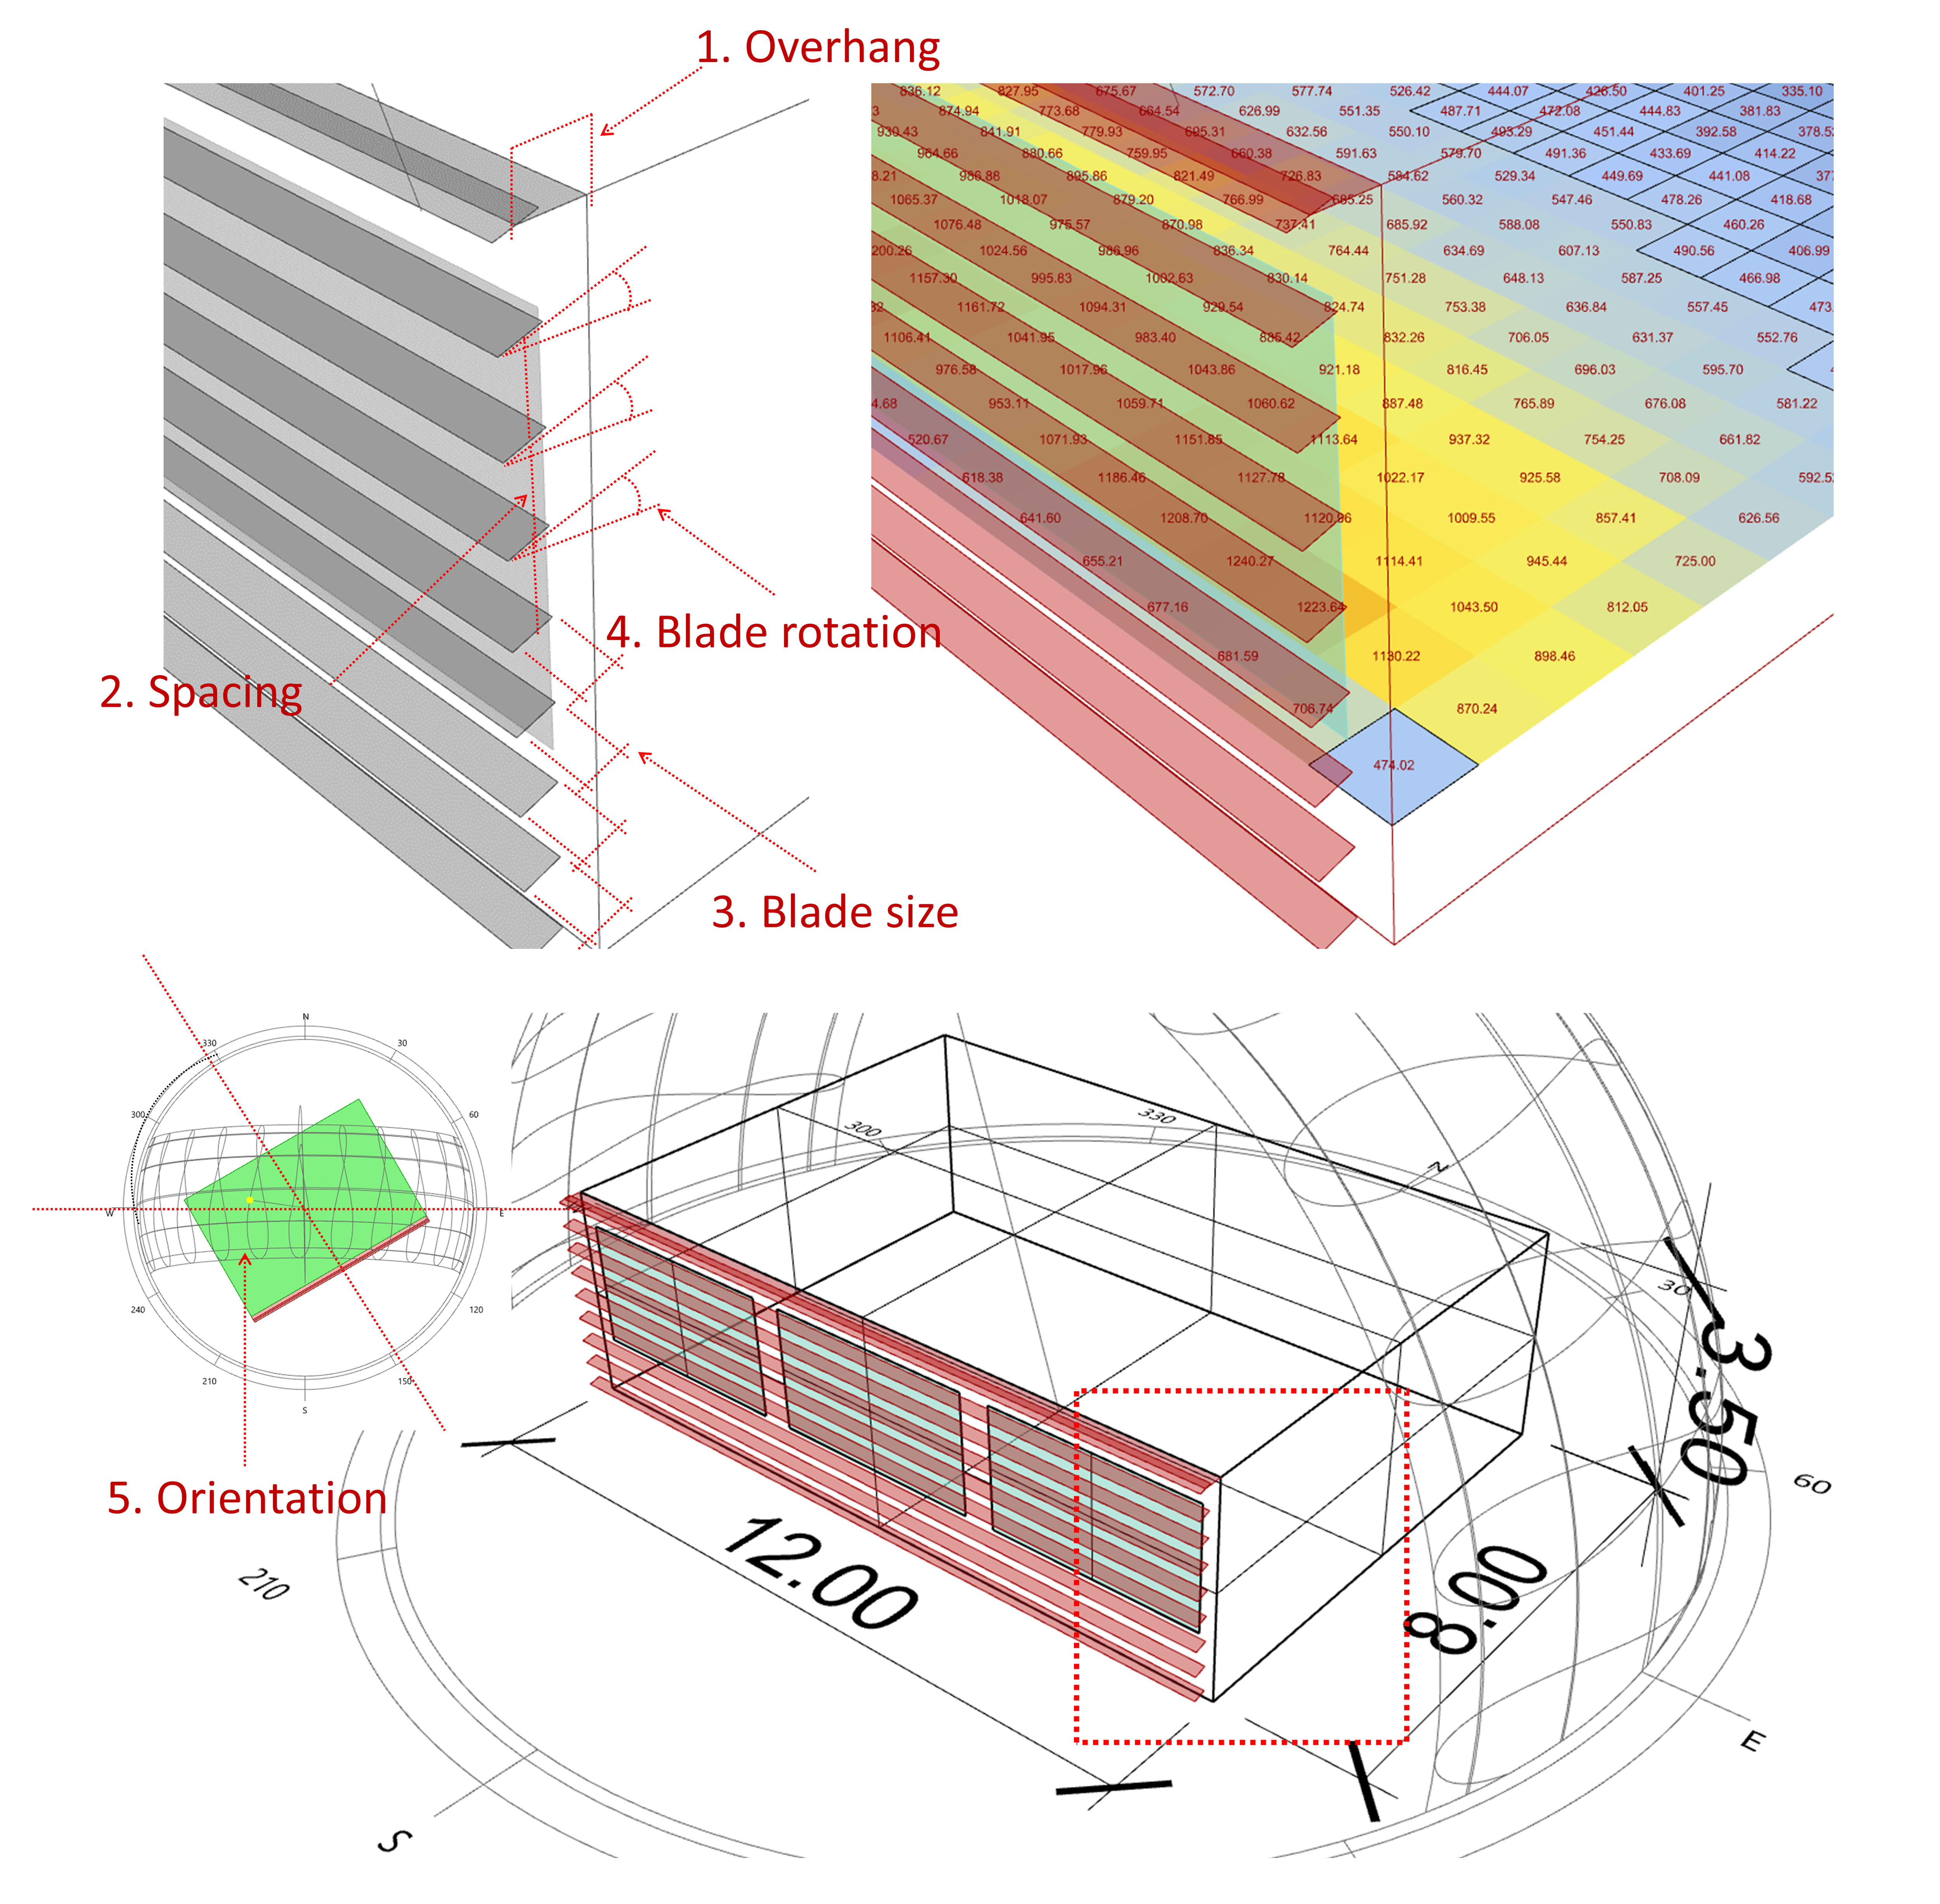 Dynamic parameters of the louver shading and the room orientation.